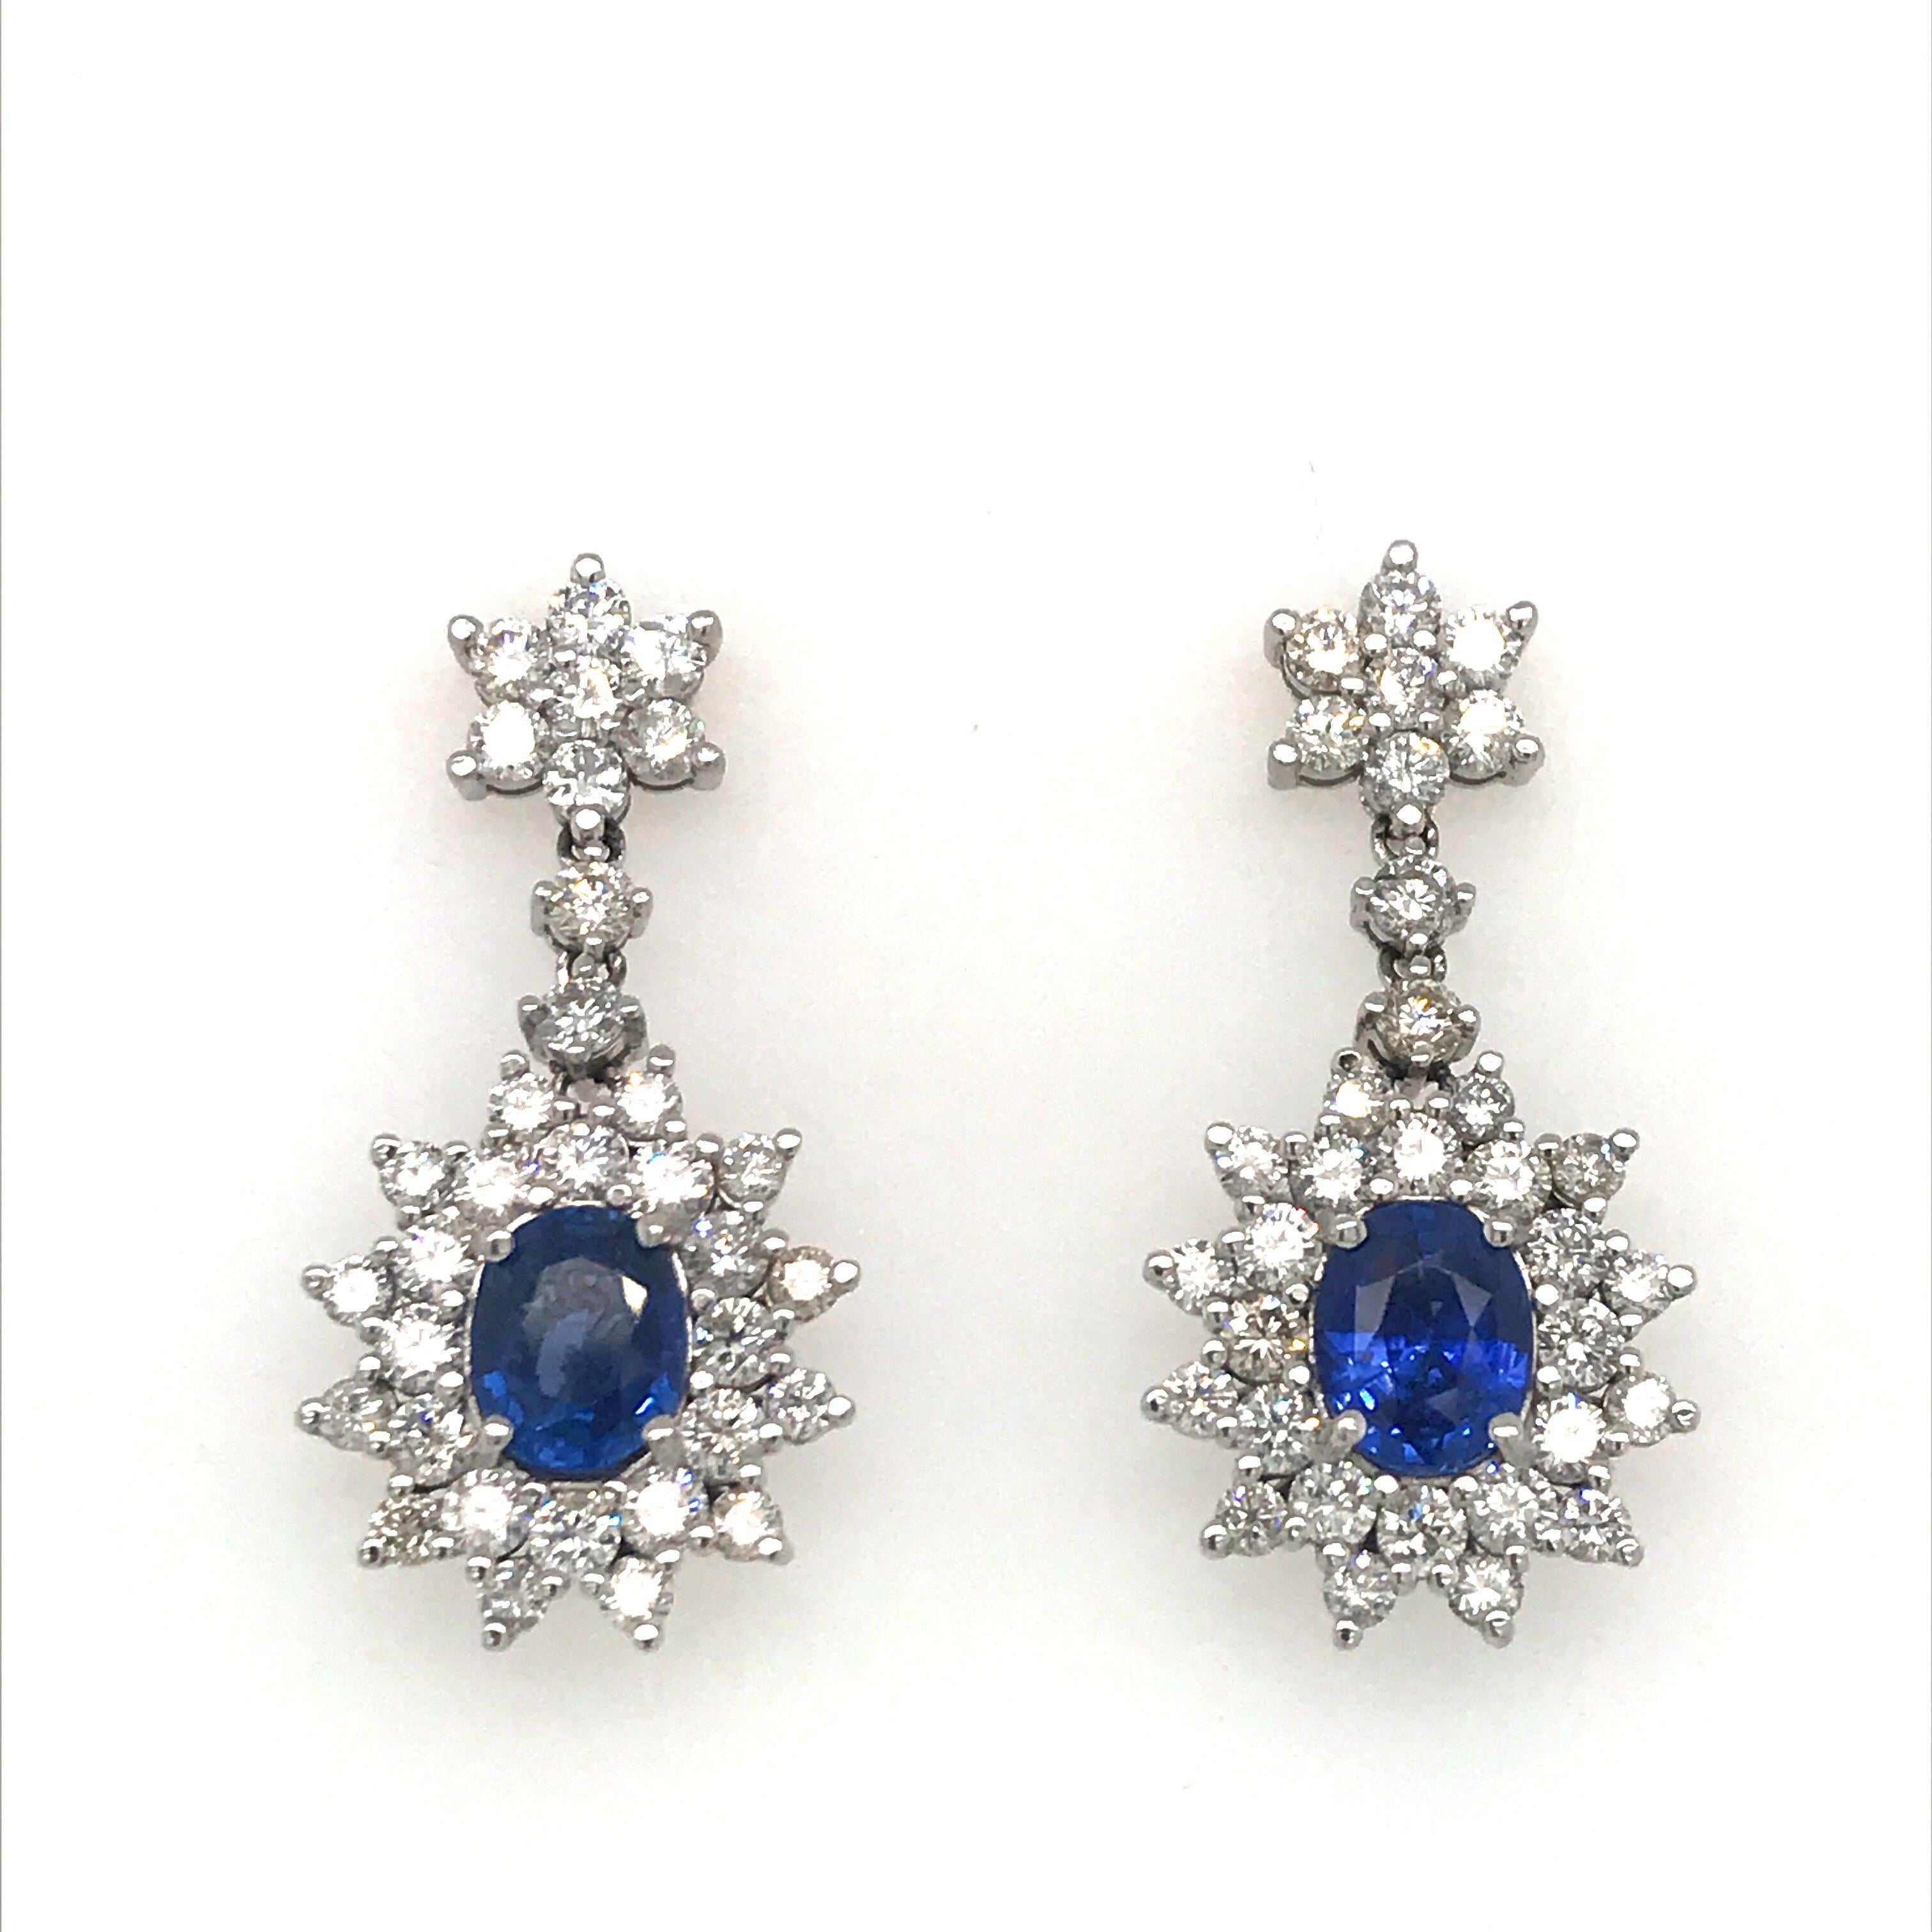 18K White gold drop earrings featuring two oval sapphires weighing 3.40 carats flanked with round brilliants weighing 3.65 carats.
Color G-H
Clarity SI